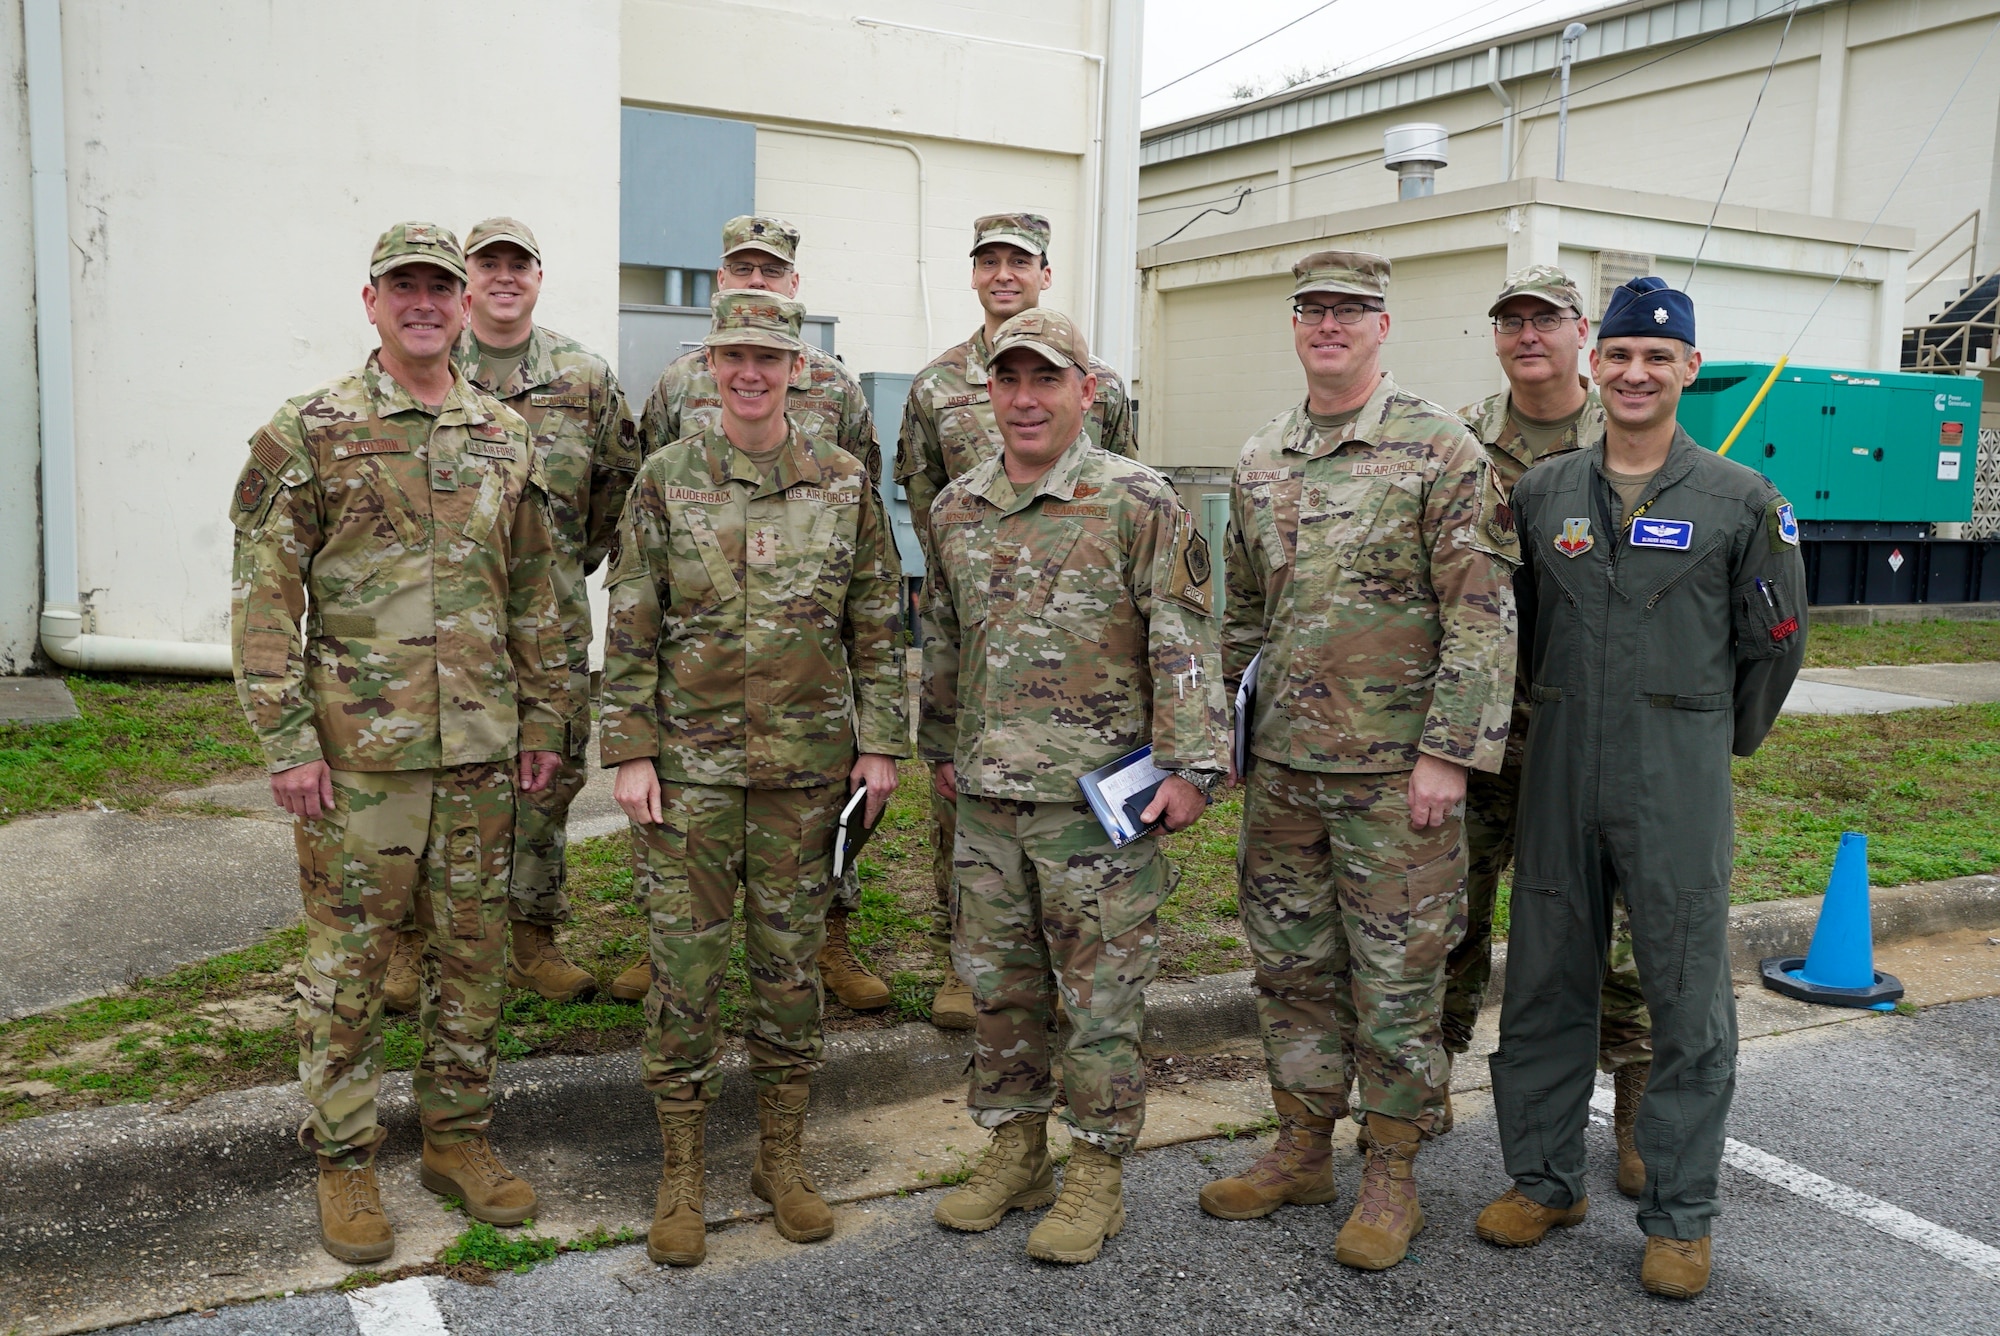 U.S. Air Force Lt. Gen. Leah G. Lauderback, deputy chief of staff for intelligence, surveillance, reconnaissance and cyber effects operations, poses with leadership from the 350th Spectrum Warfare Wing during a wing visit at Eglin Air Base, Fla., Feb. 1, 2023. Lauderback visited the 350th SWW to learn more about the wing’s mission to provide cutting-edge Electromagnetic Spectrum capabilities to warfighters. (U.S. Air Force photo by 1st Lt. Benjamin Aronson)